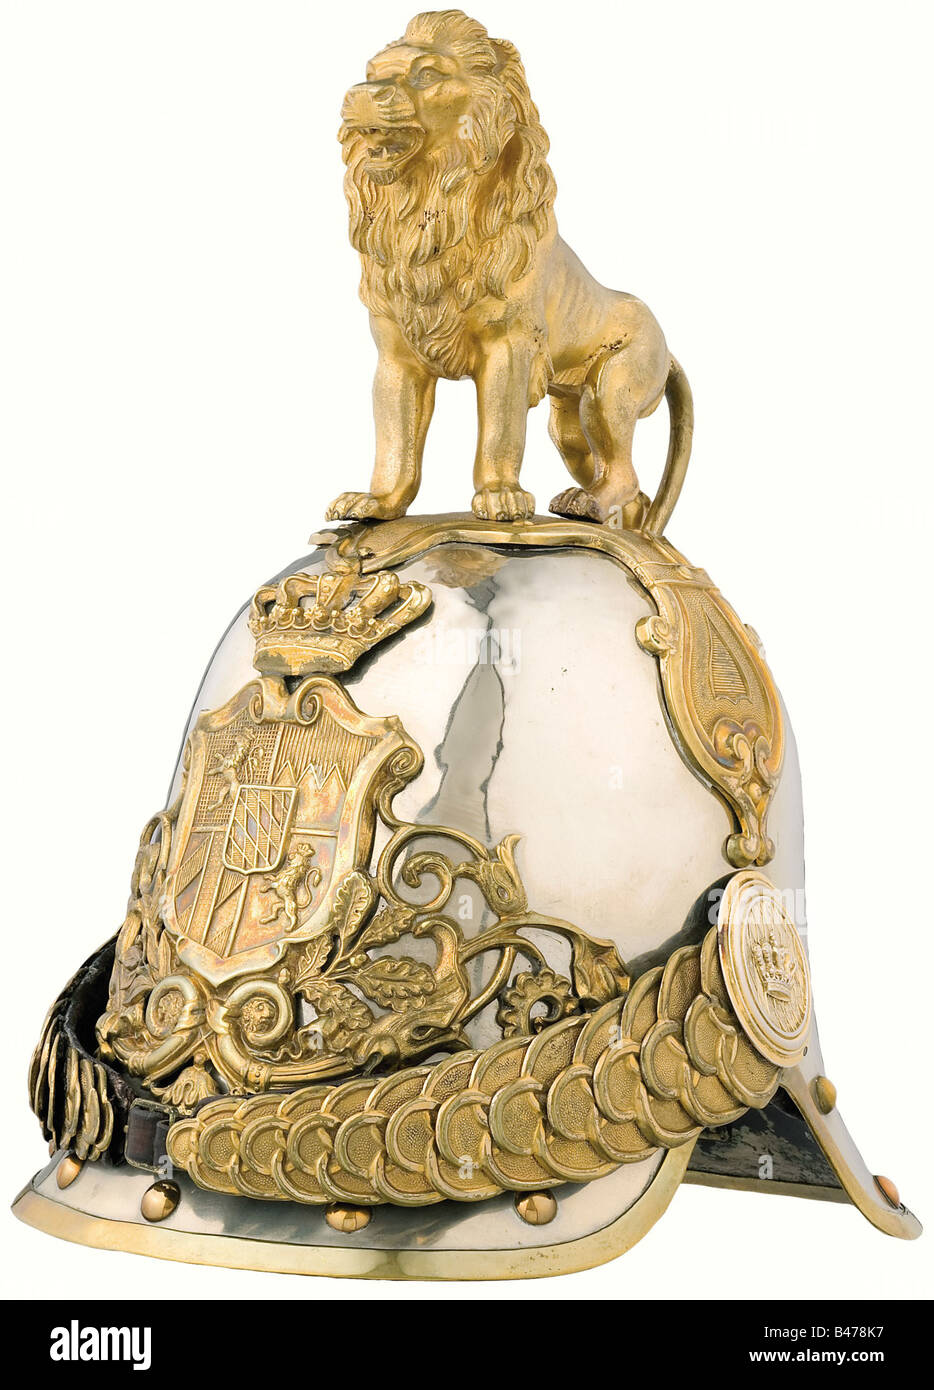 A helmet of 1852 pattern for the Archers Life Guard., In the large parade version with the standing, gold plated lion. Polished nickel-silver skull with fire-gilded tombac fittings, broad metal chinscales on crown rosettes. The lion has the part number '37' on the rear leg. Original leather lining. The part number '48' is soldered into the rear peak. Cracks, visible only from the inside, and a small break in the skull. Rare helmet. historic, historical, 19th century, Bavaria, Bavarian, German, Germany, Southern Germany, the South of Germany, object, objects, st, Stock Photo